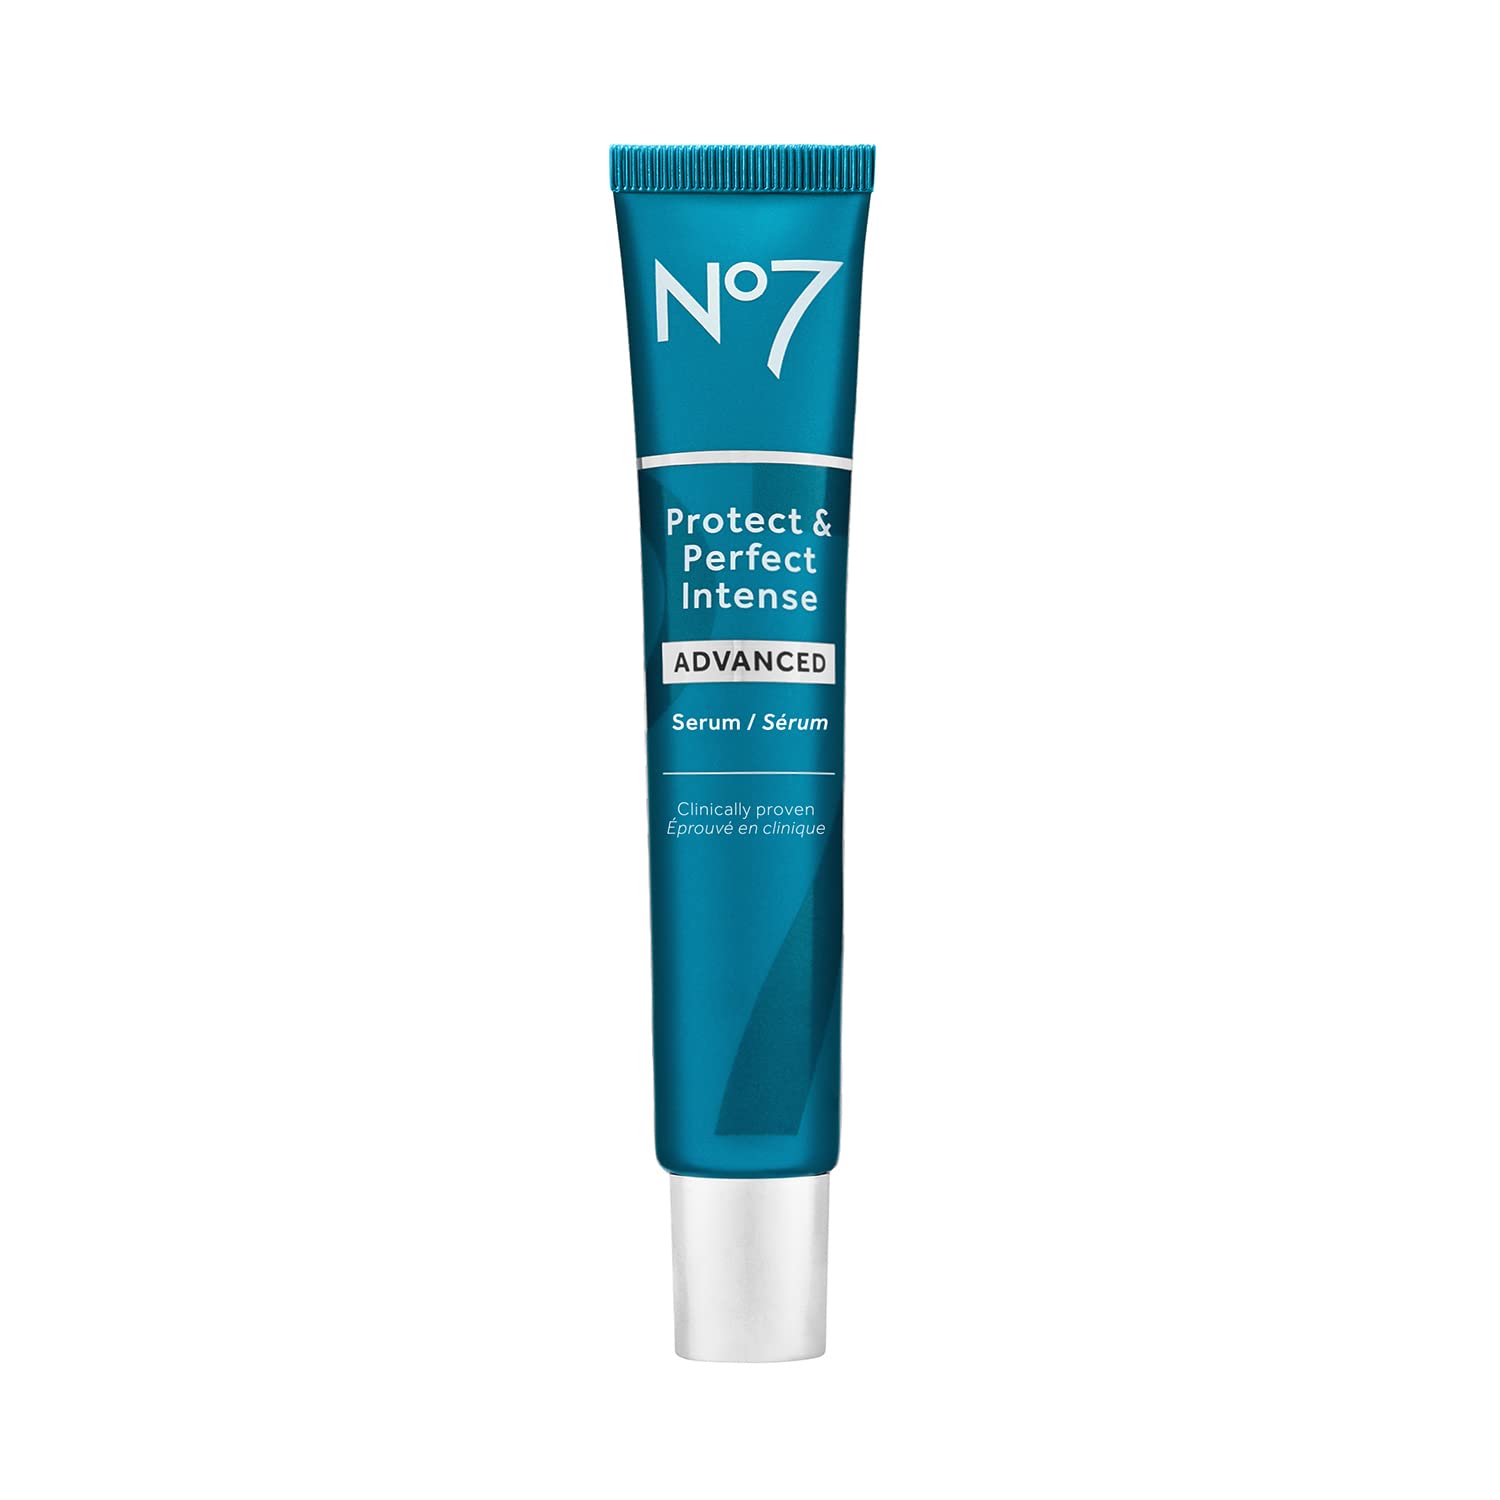 No7 Protect & Perfect Intense Advanced Serum - Rice Protein & Alfalfa Complex for Fine Lines and Wrinkles - Anti Aging Facial Serum with Matrix 3000+ Technology (50 )